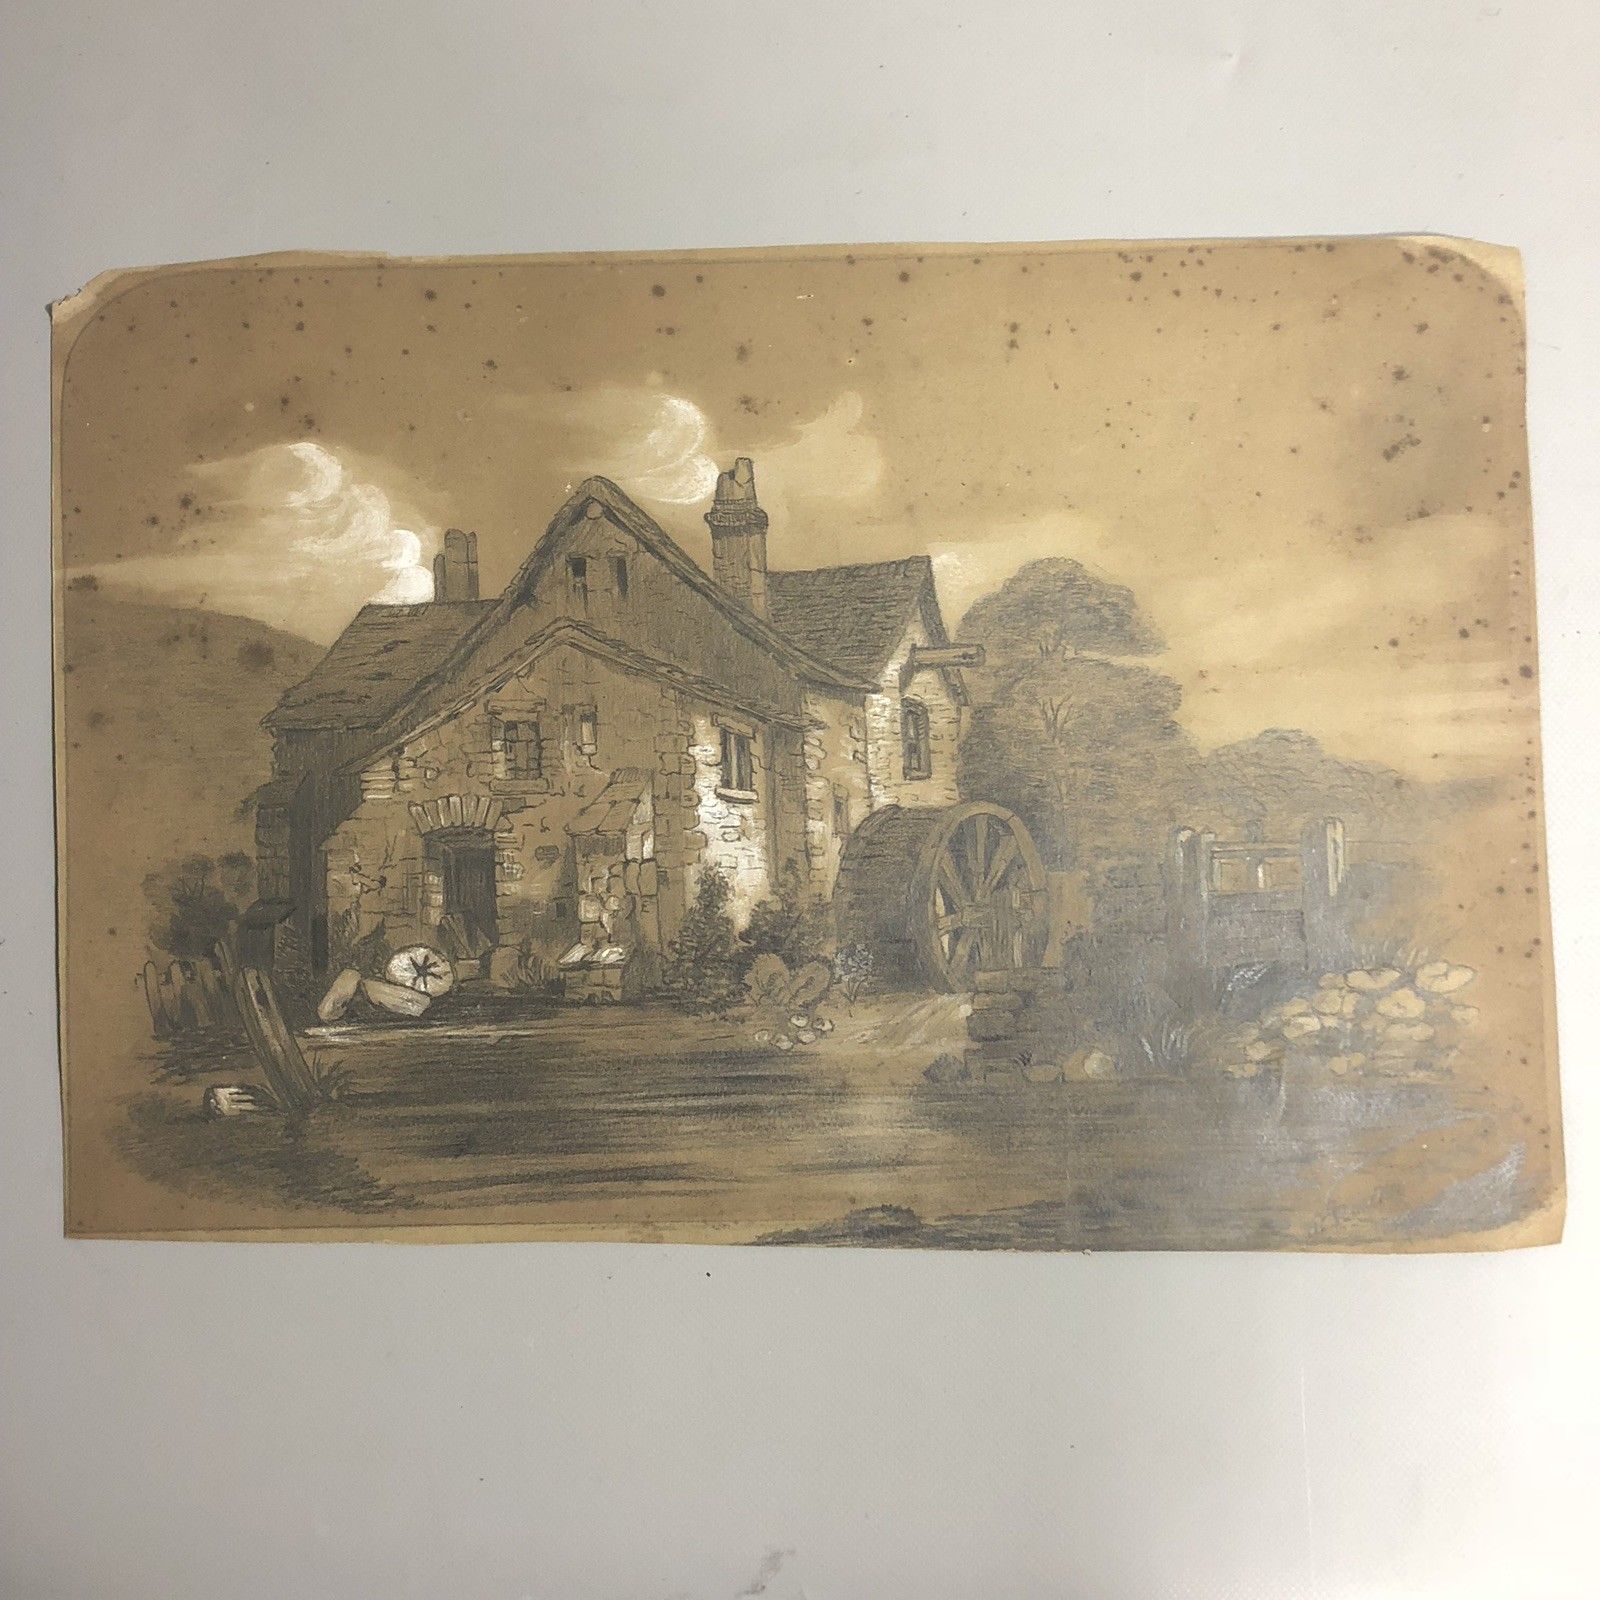 An Antique Sketch of a Mill titled - At Roseley, Derbyshire - Possibly Rowsley - Image 2 of 2